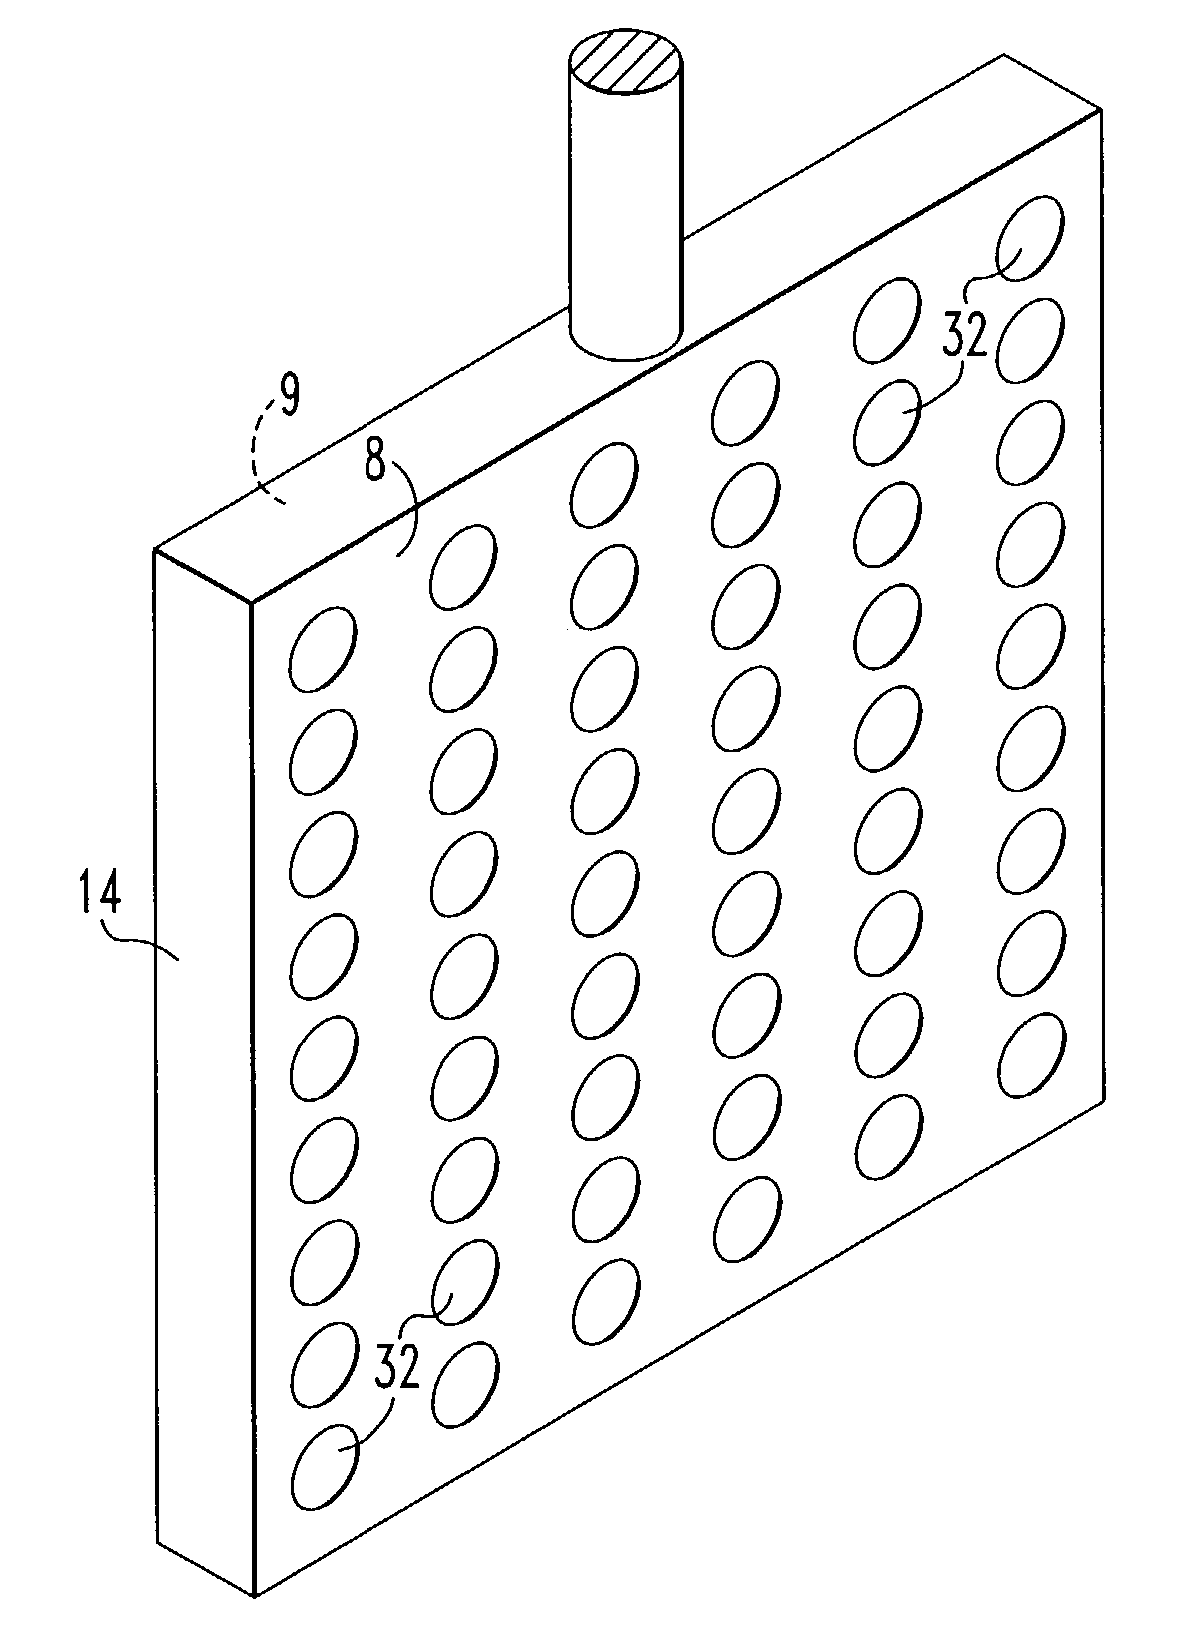 Cu-Ni-Fe anode for use in aluminum producing electrolytic cell